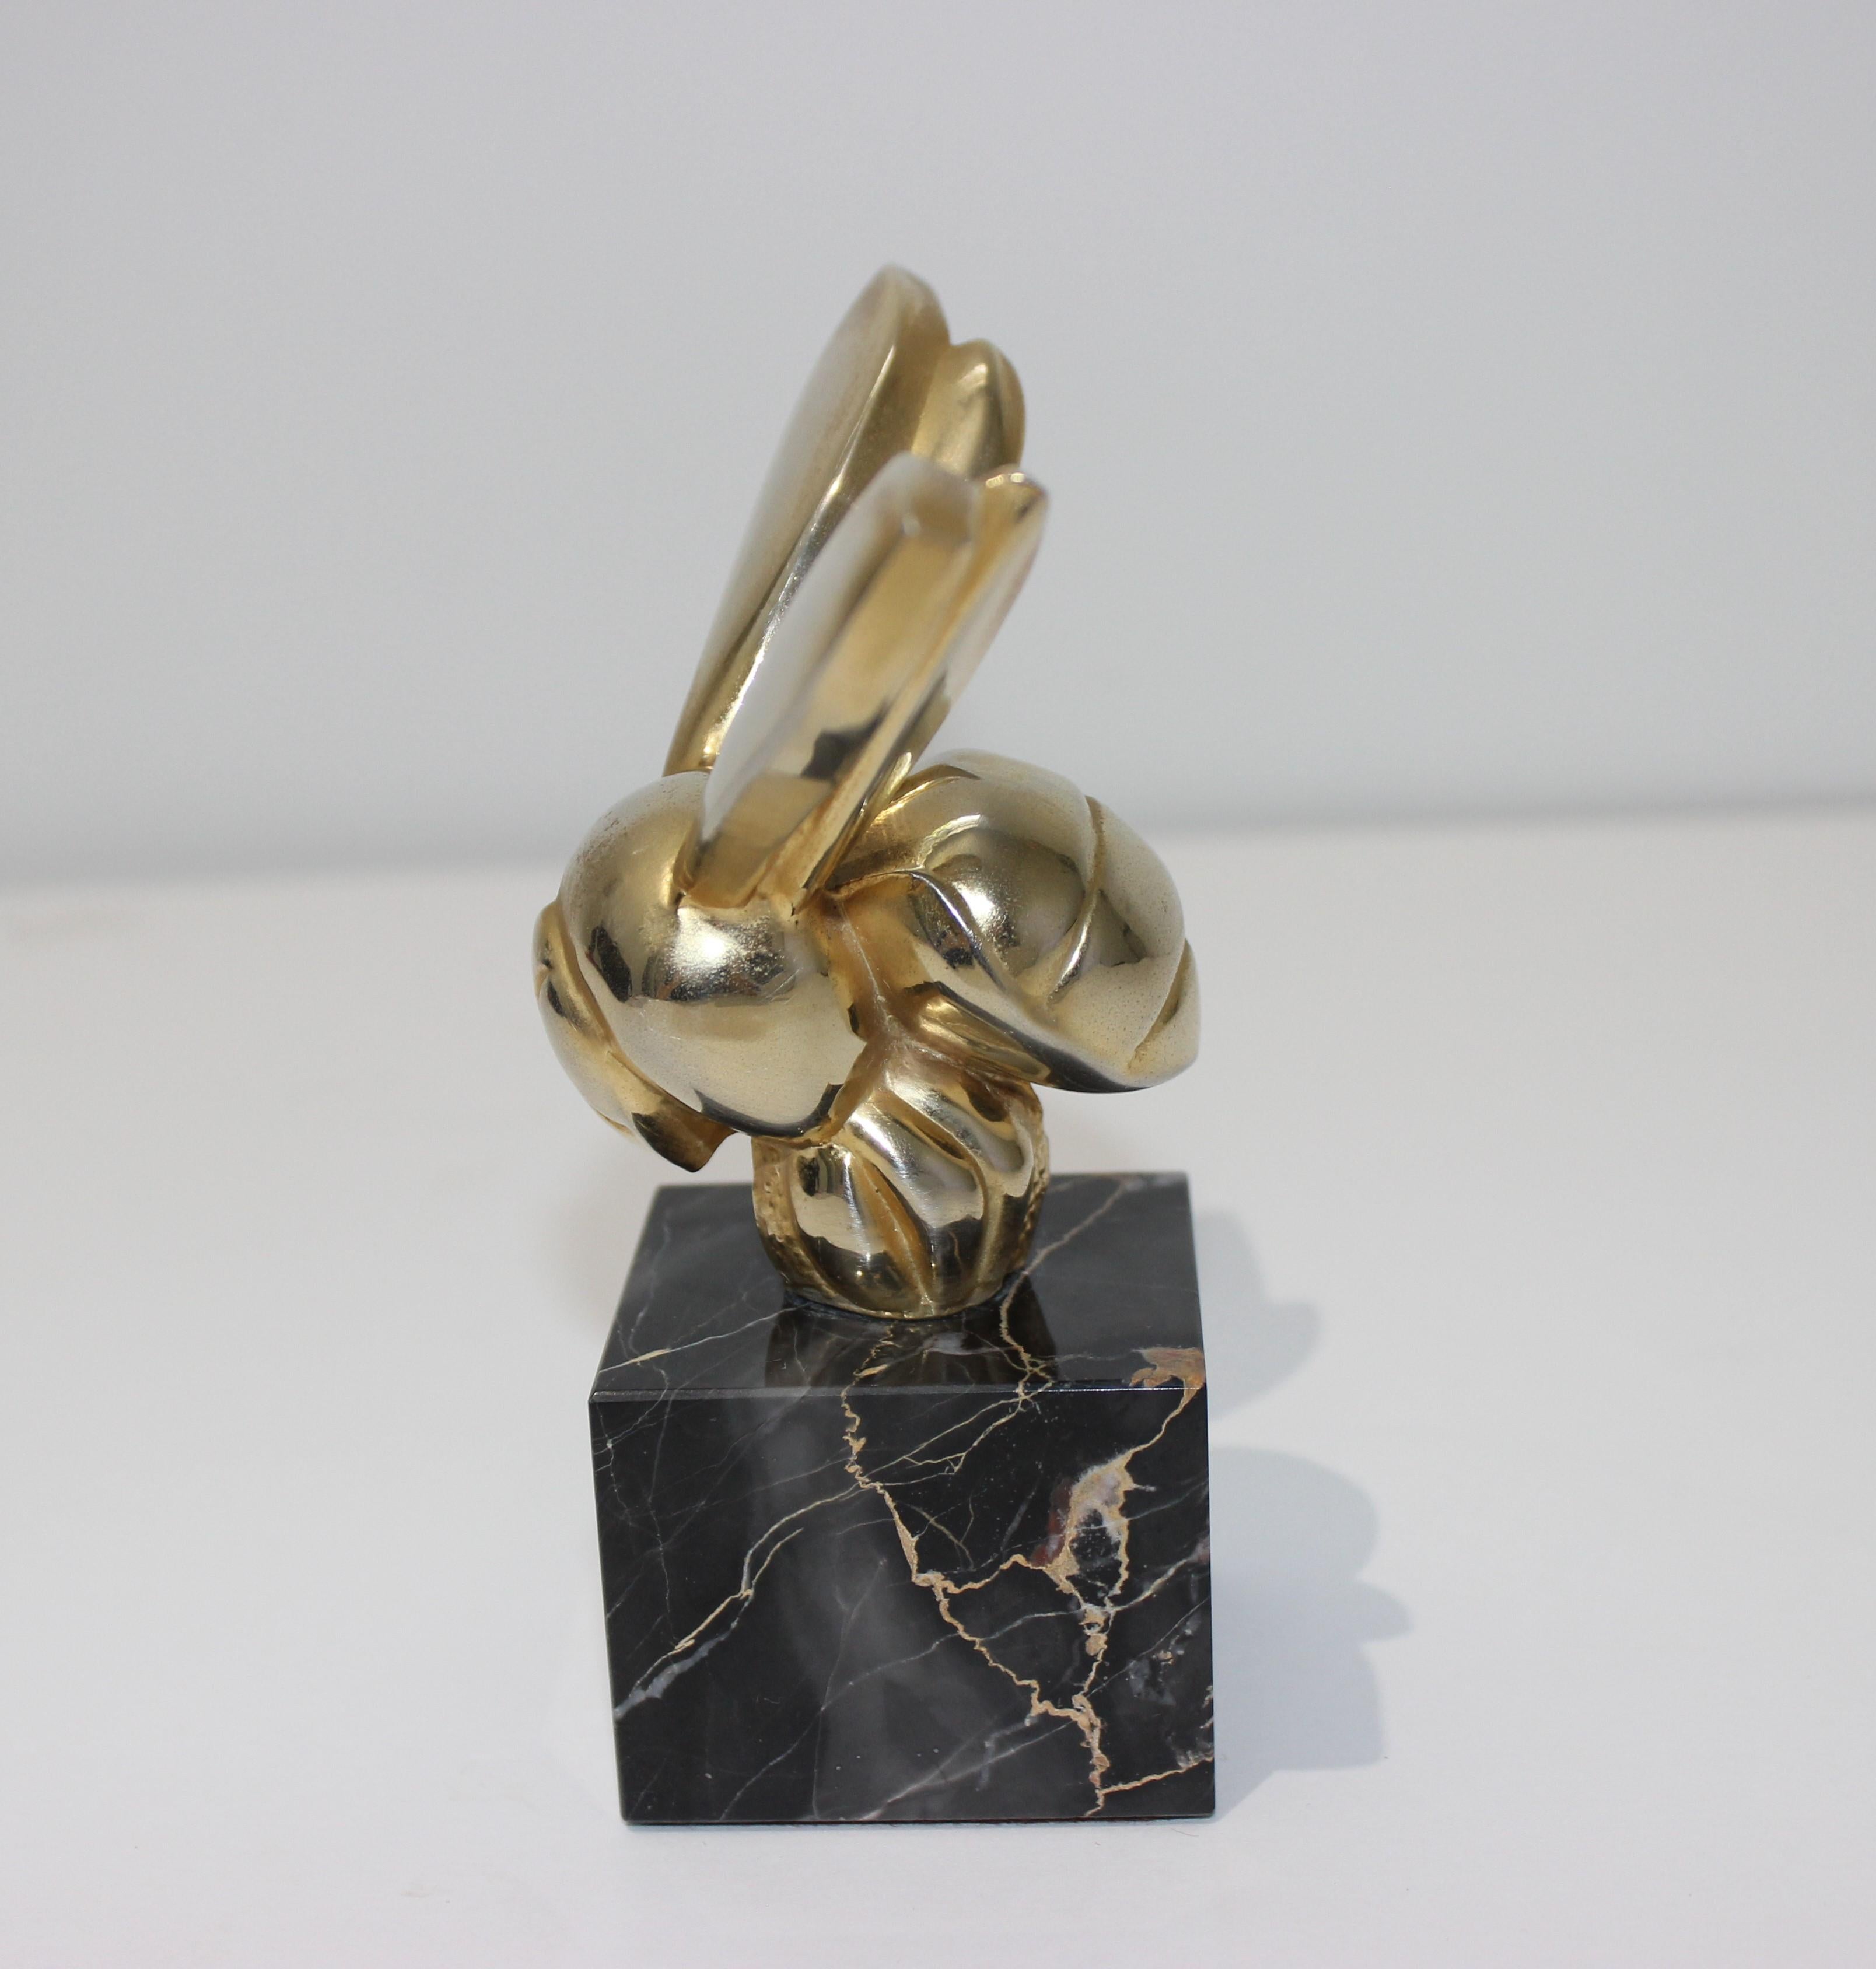 Polished Bumble Bee Sculpture After G. Lachaise